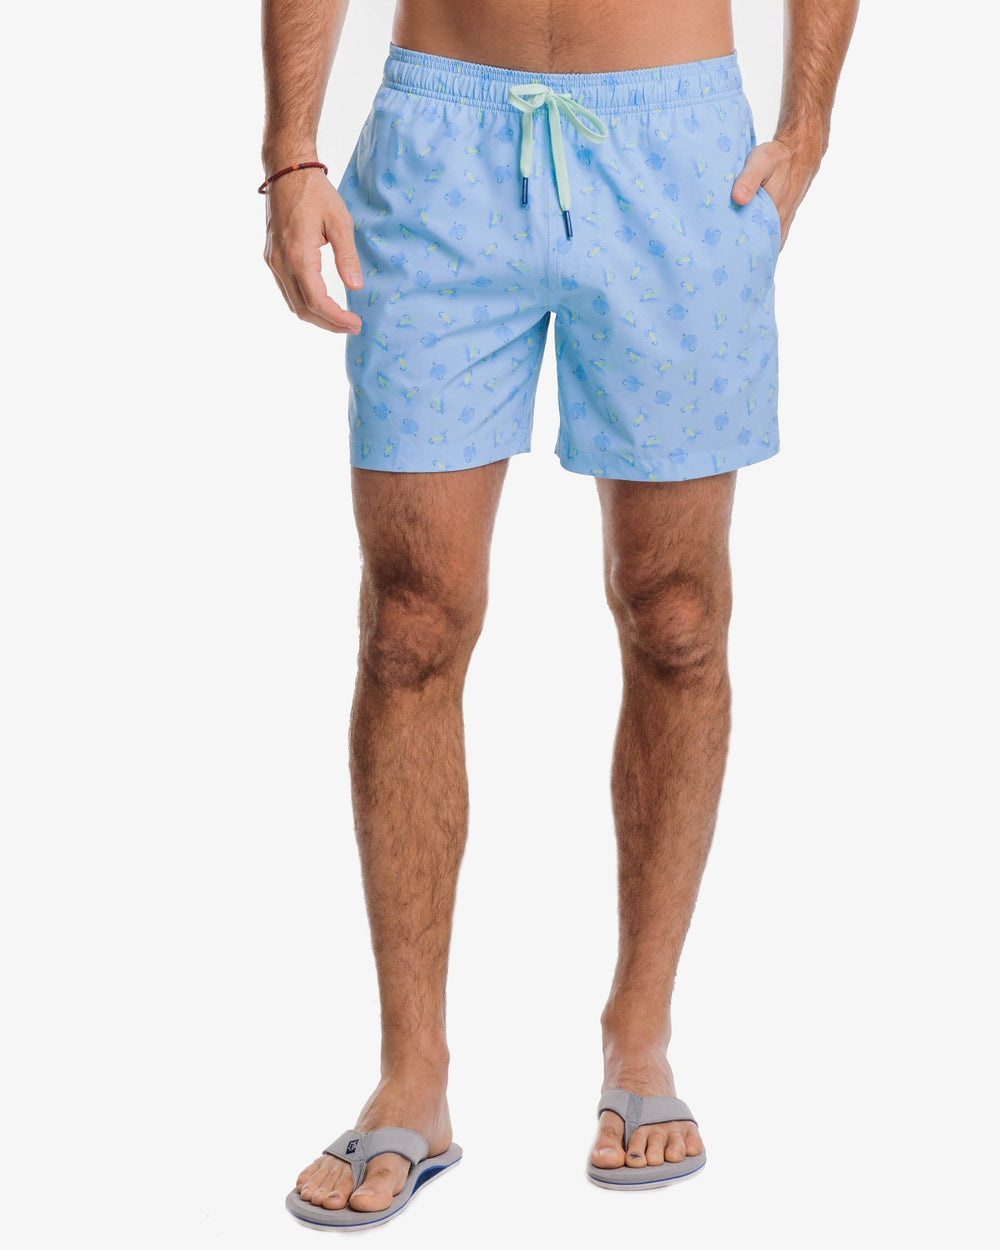 The front view of the Southern Tide Guy With Allure Printed Swim Trunk by Southern Tide - Rain Water